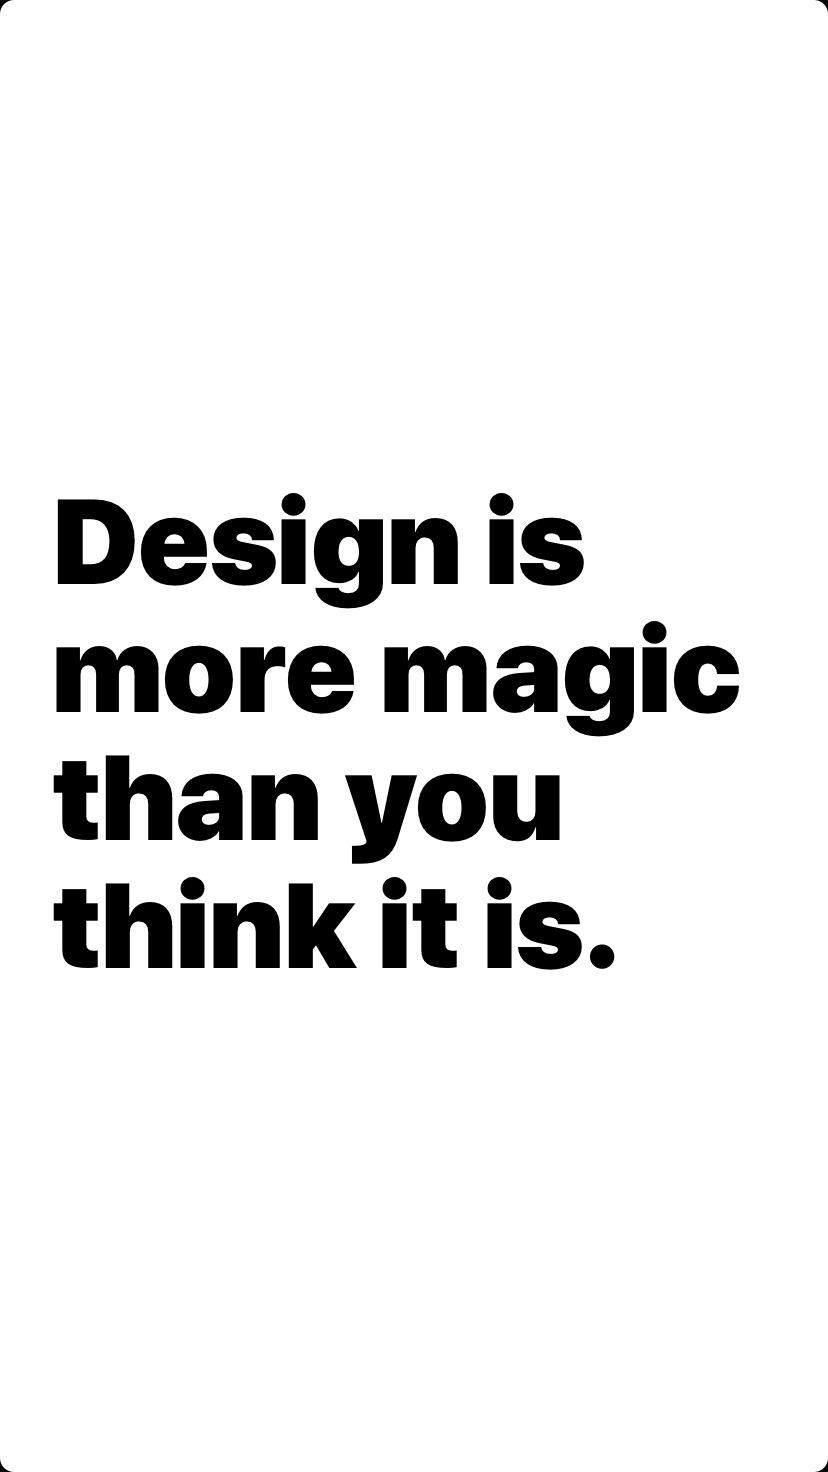 Design is more magic than you think it is.